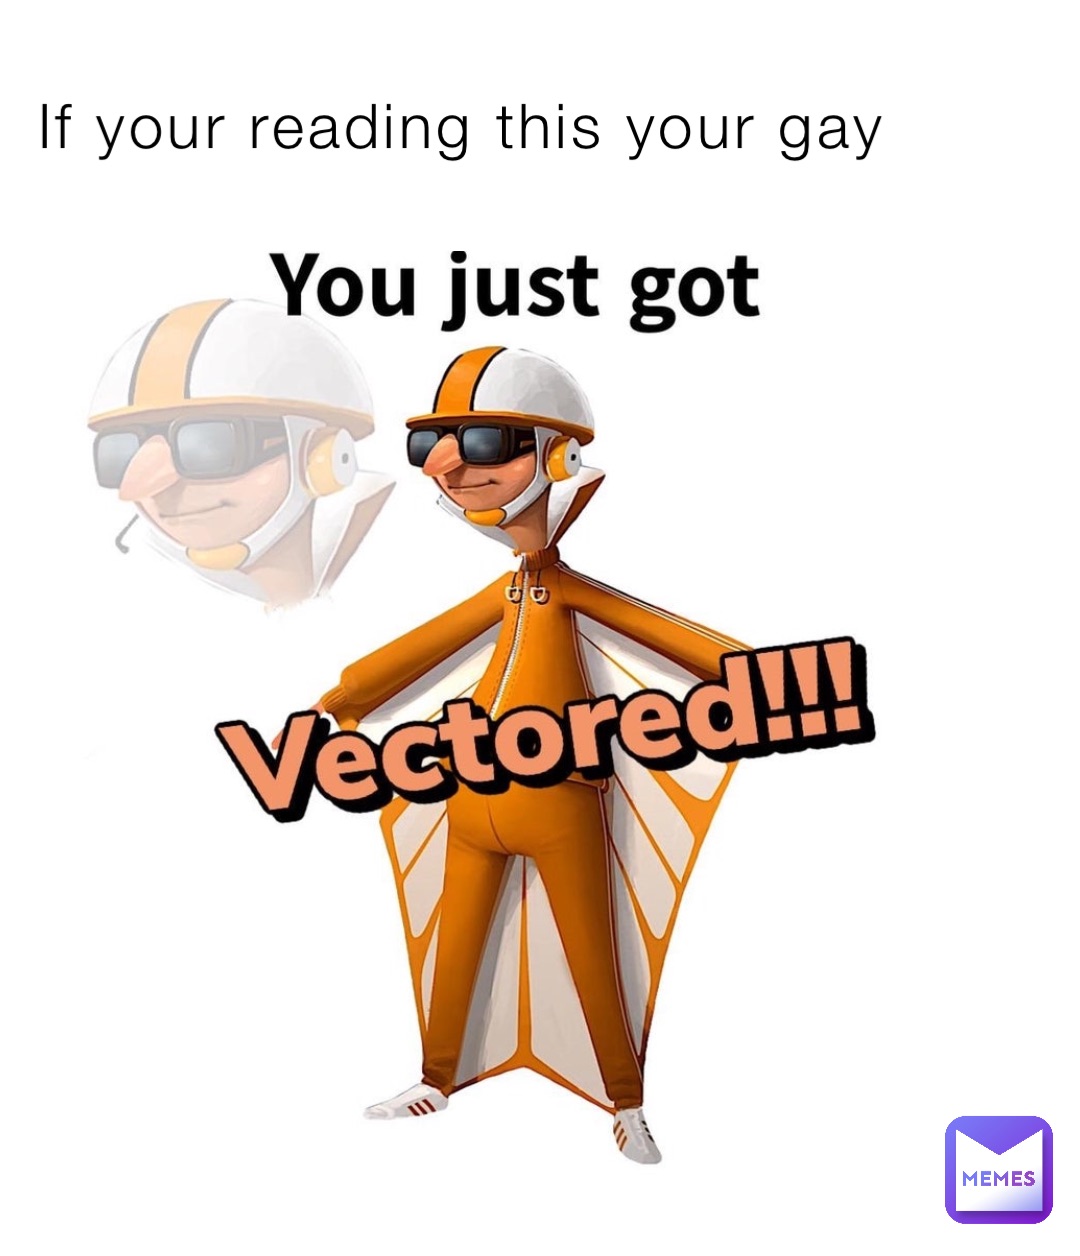 If your reading this your gay